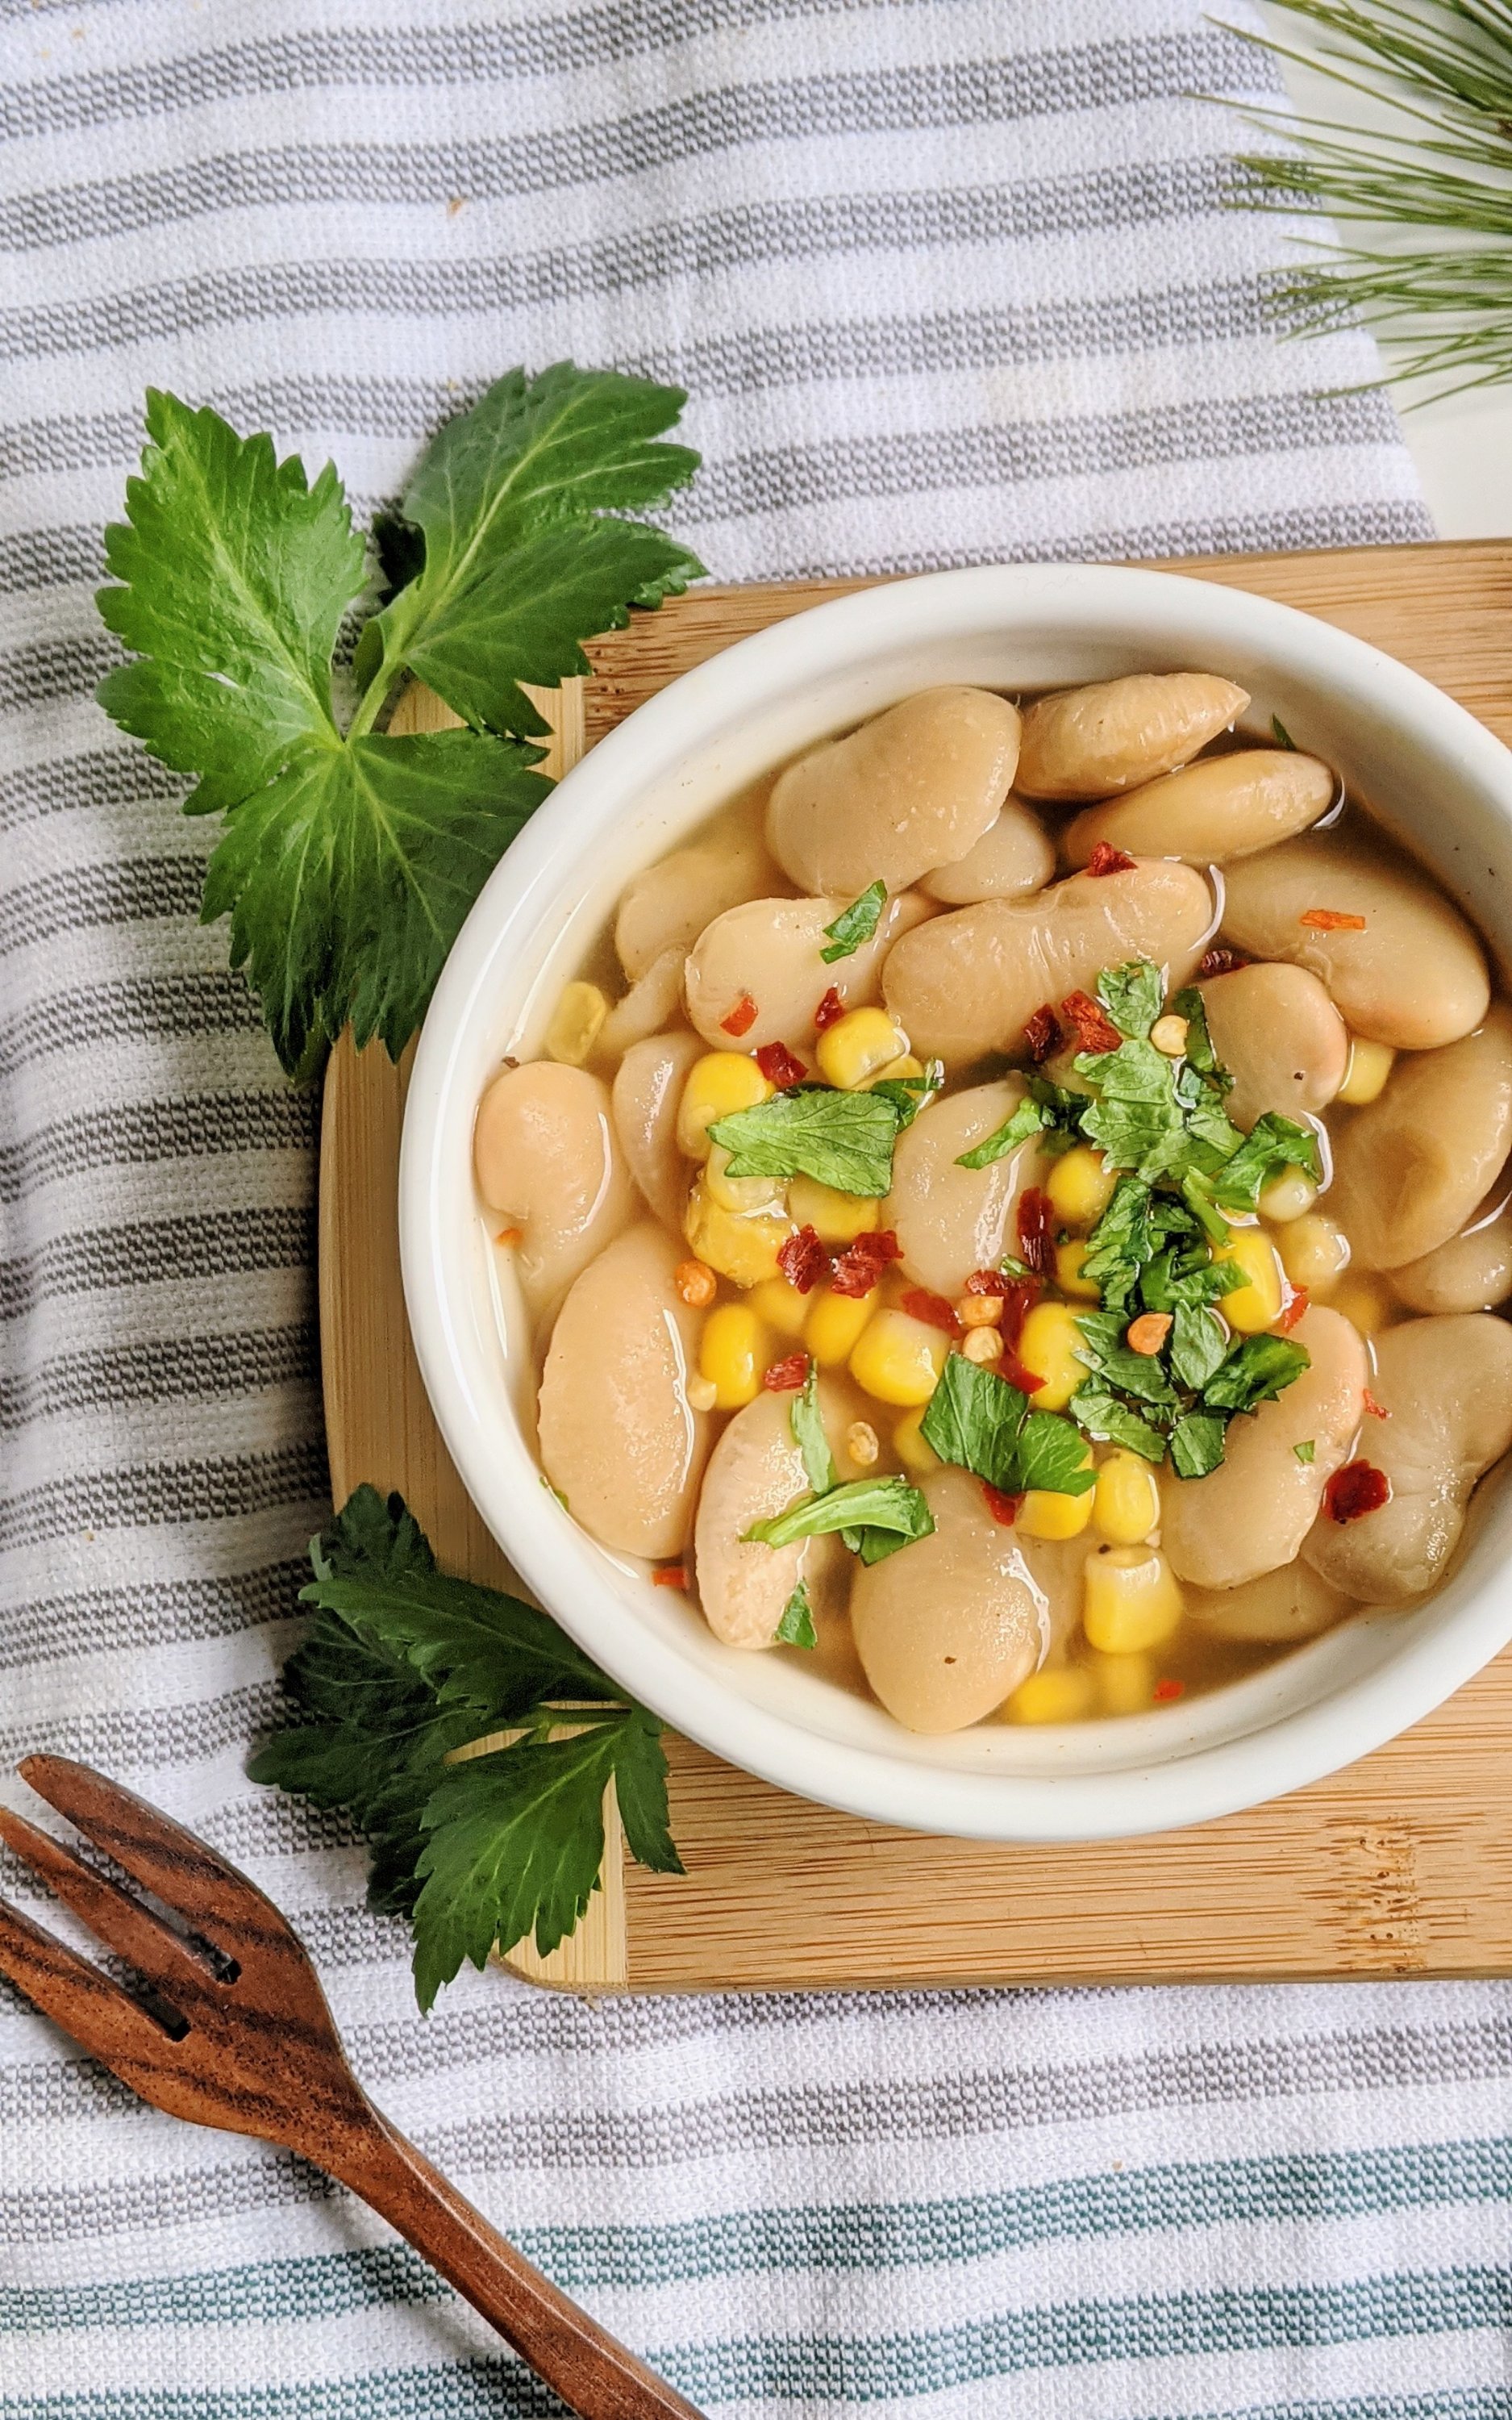 vegan succotash recipe in the instant pot pressure cooker dried beans no soaking healthy high protein summer recipes all year pantry staples gluten free vegetarian